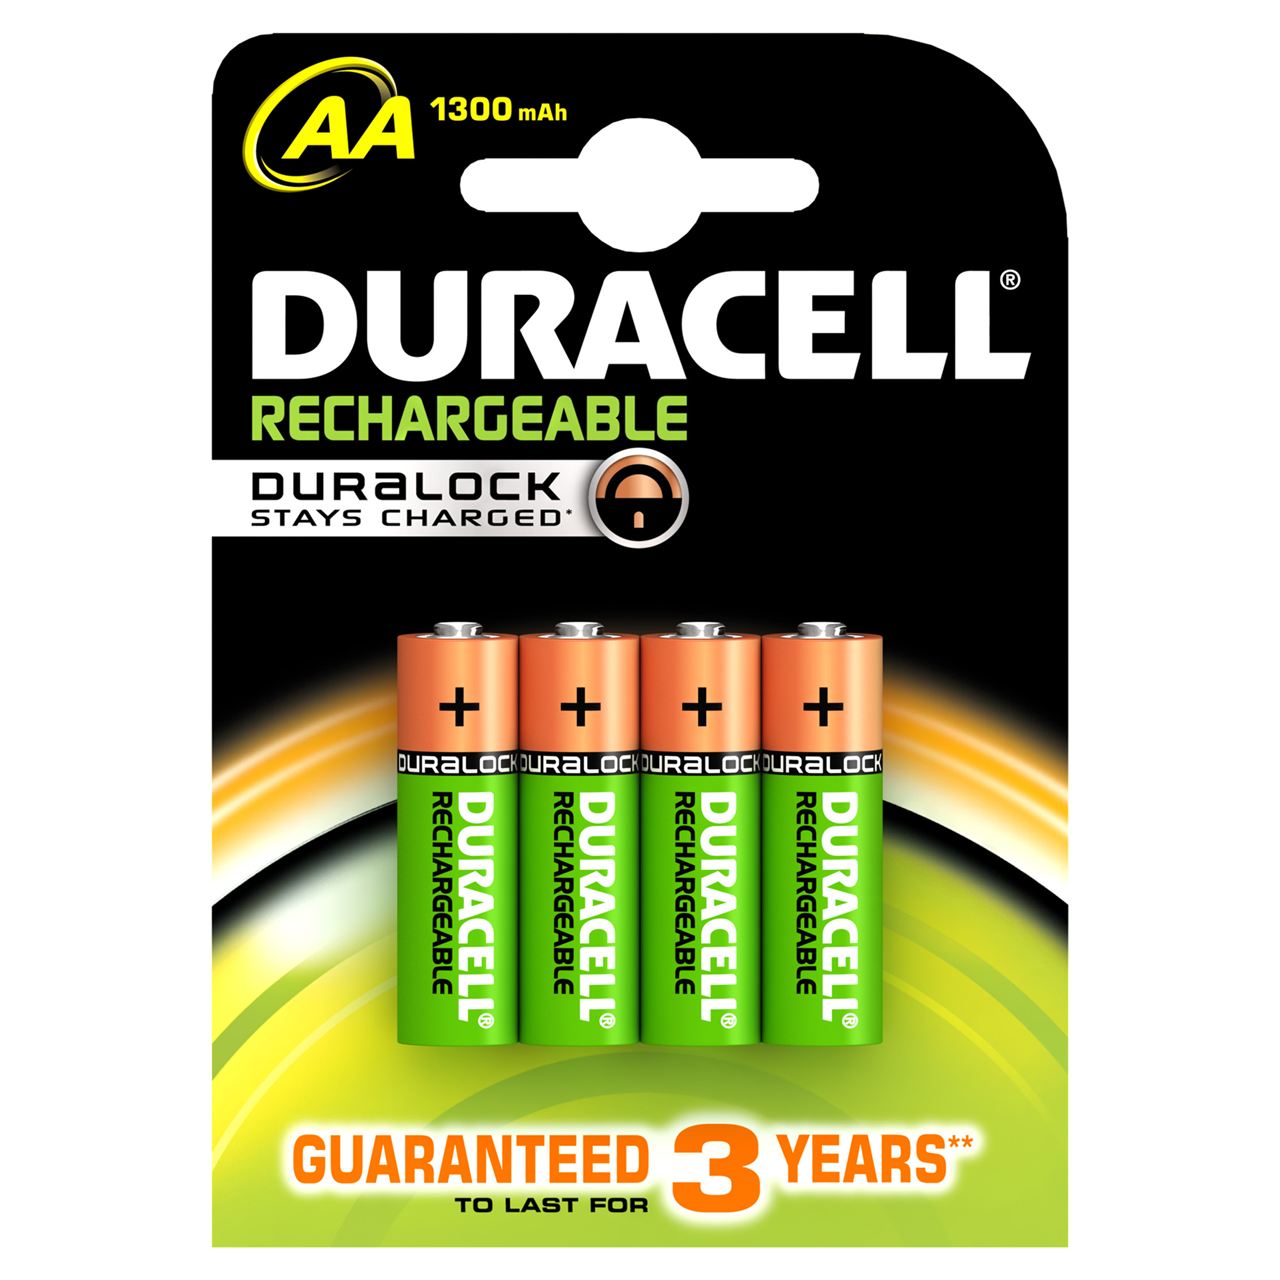 duracell rechargeable batteries mah